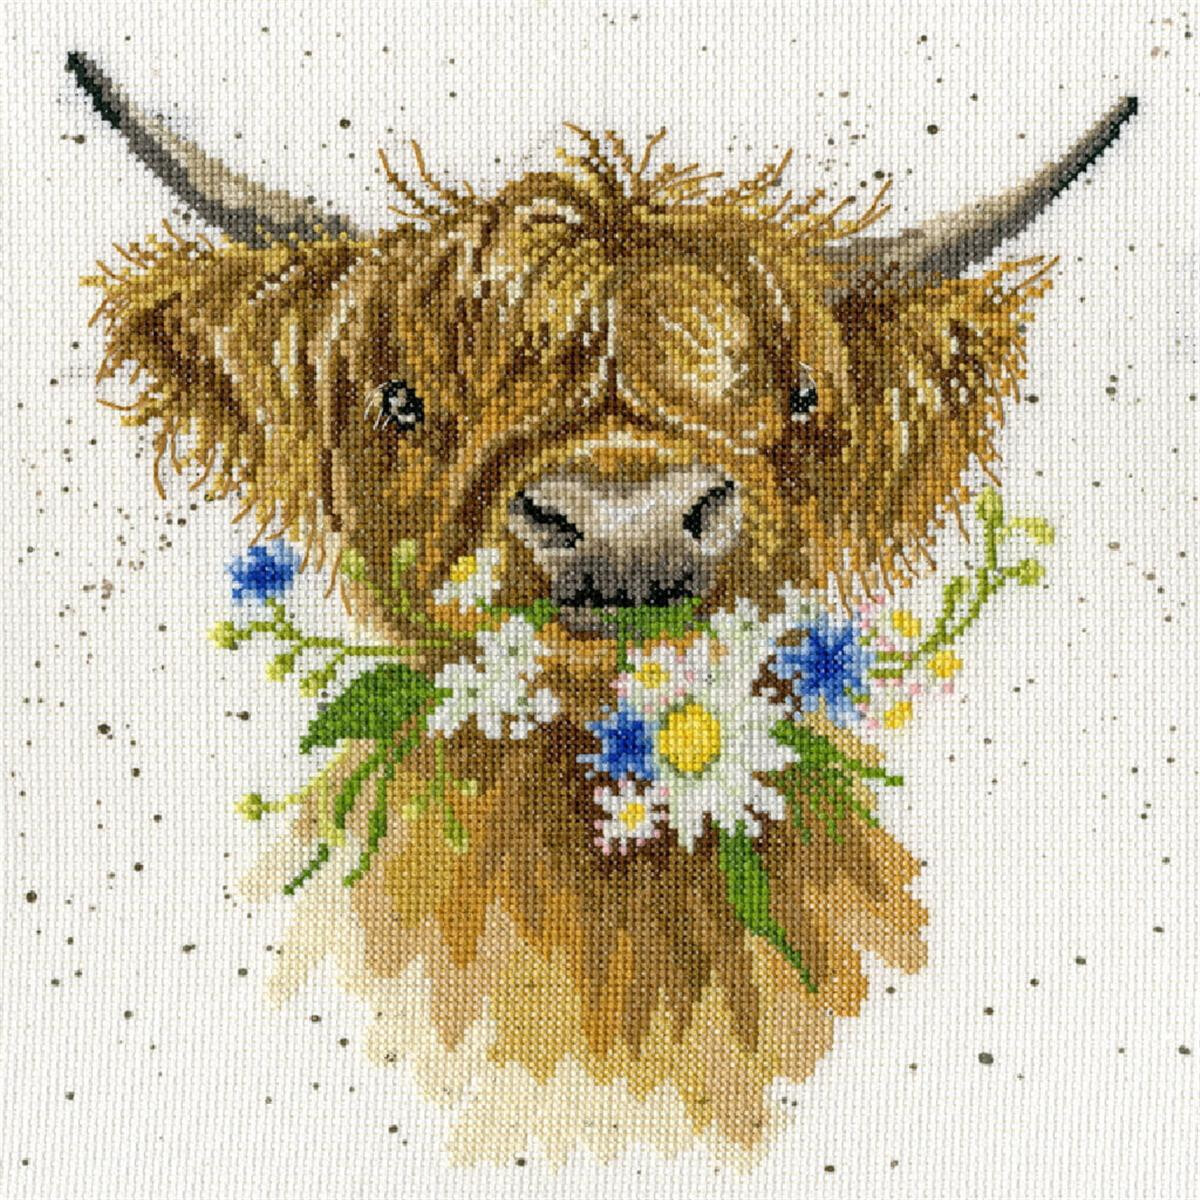 The embroidery kit from Bothy Threads shows a highland...